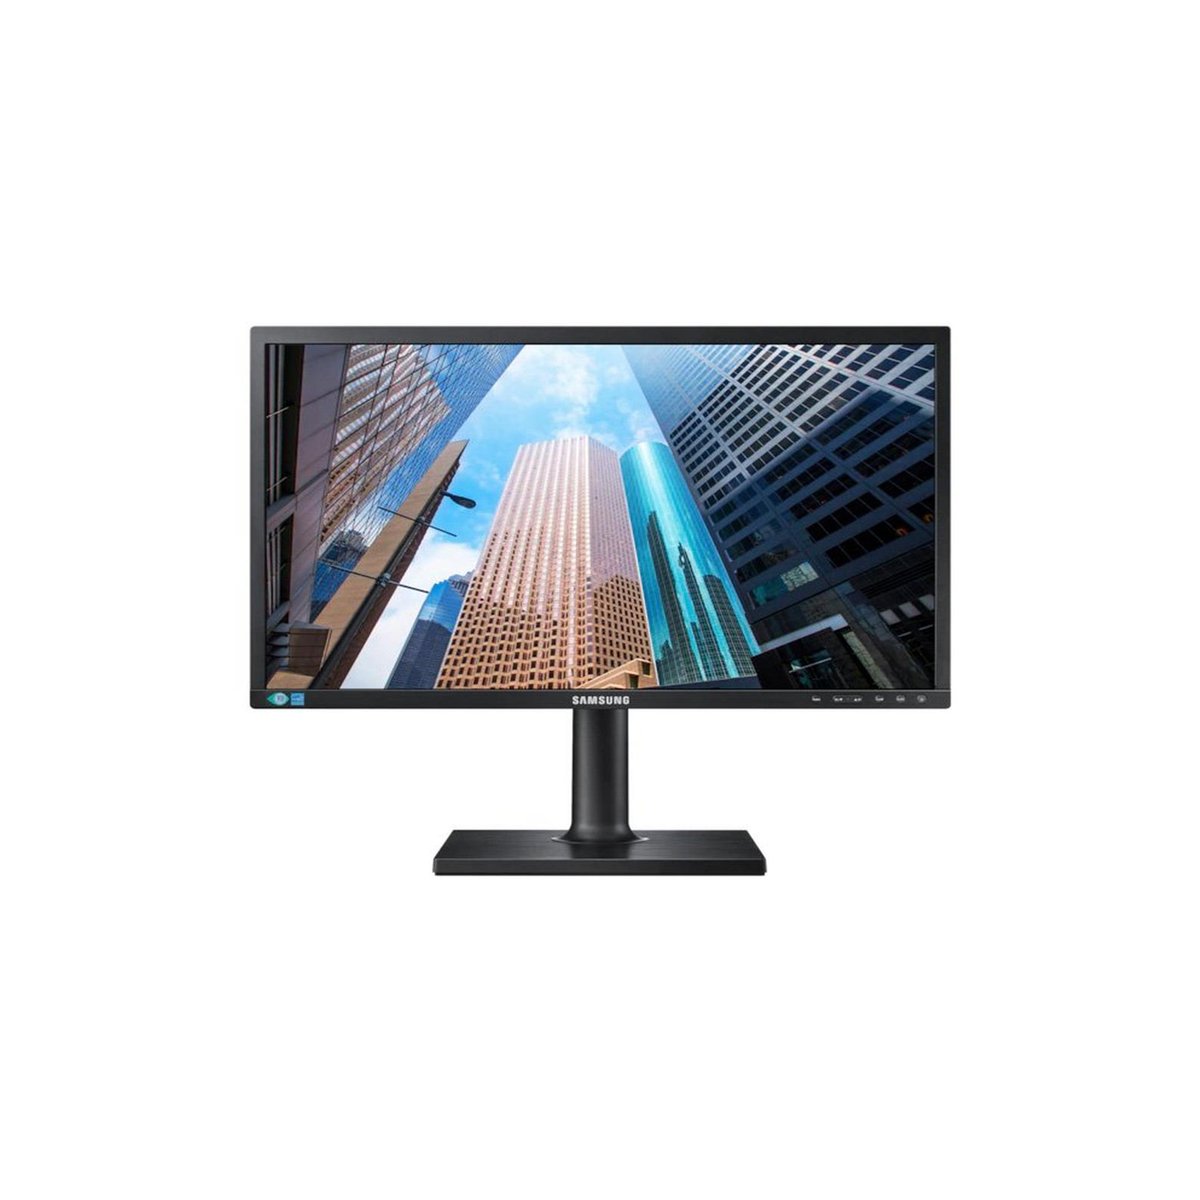 Samsung LED Monitor LS24E65UPLC 24 inches